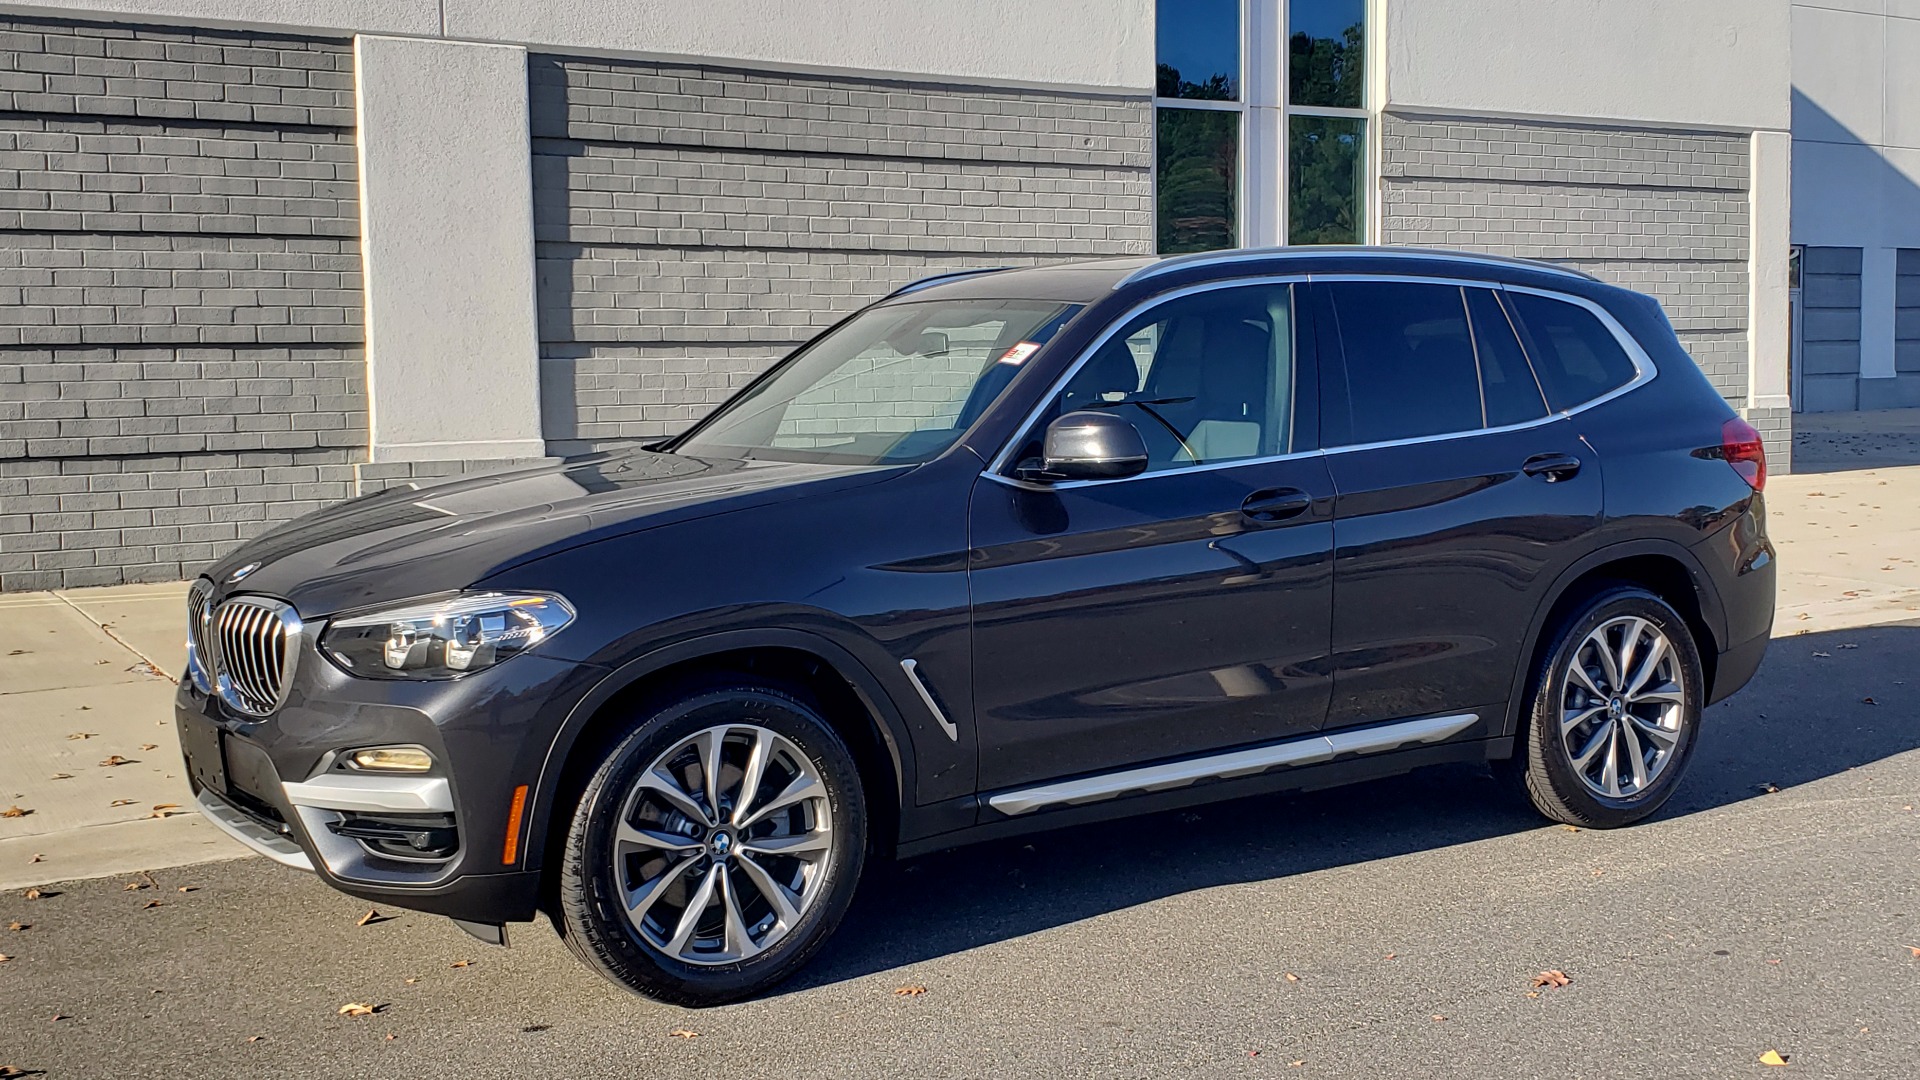 Used 2018 BMW X3 XDRIVE30I / NAV / PARK ASST / PANO-ROOF / HTD STS / REARVIEW for sale Sold at Formula Imports in Charlotte NC 28227 4